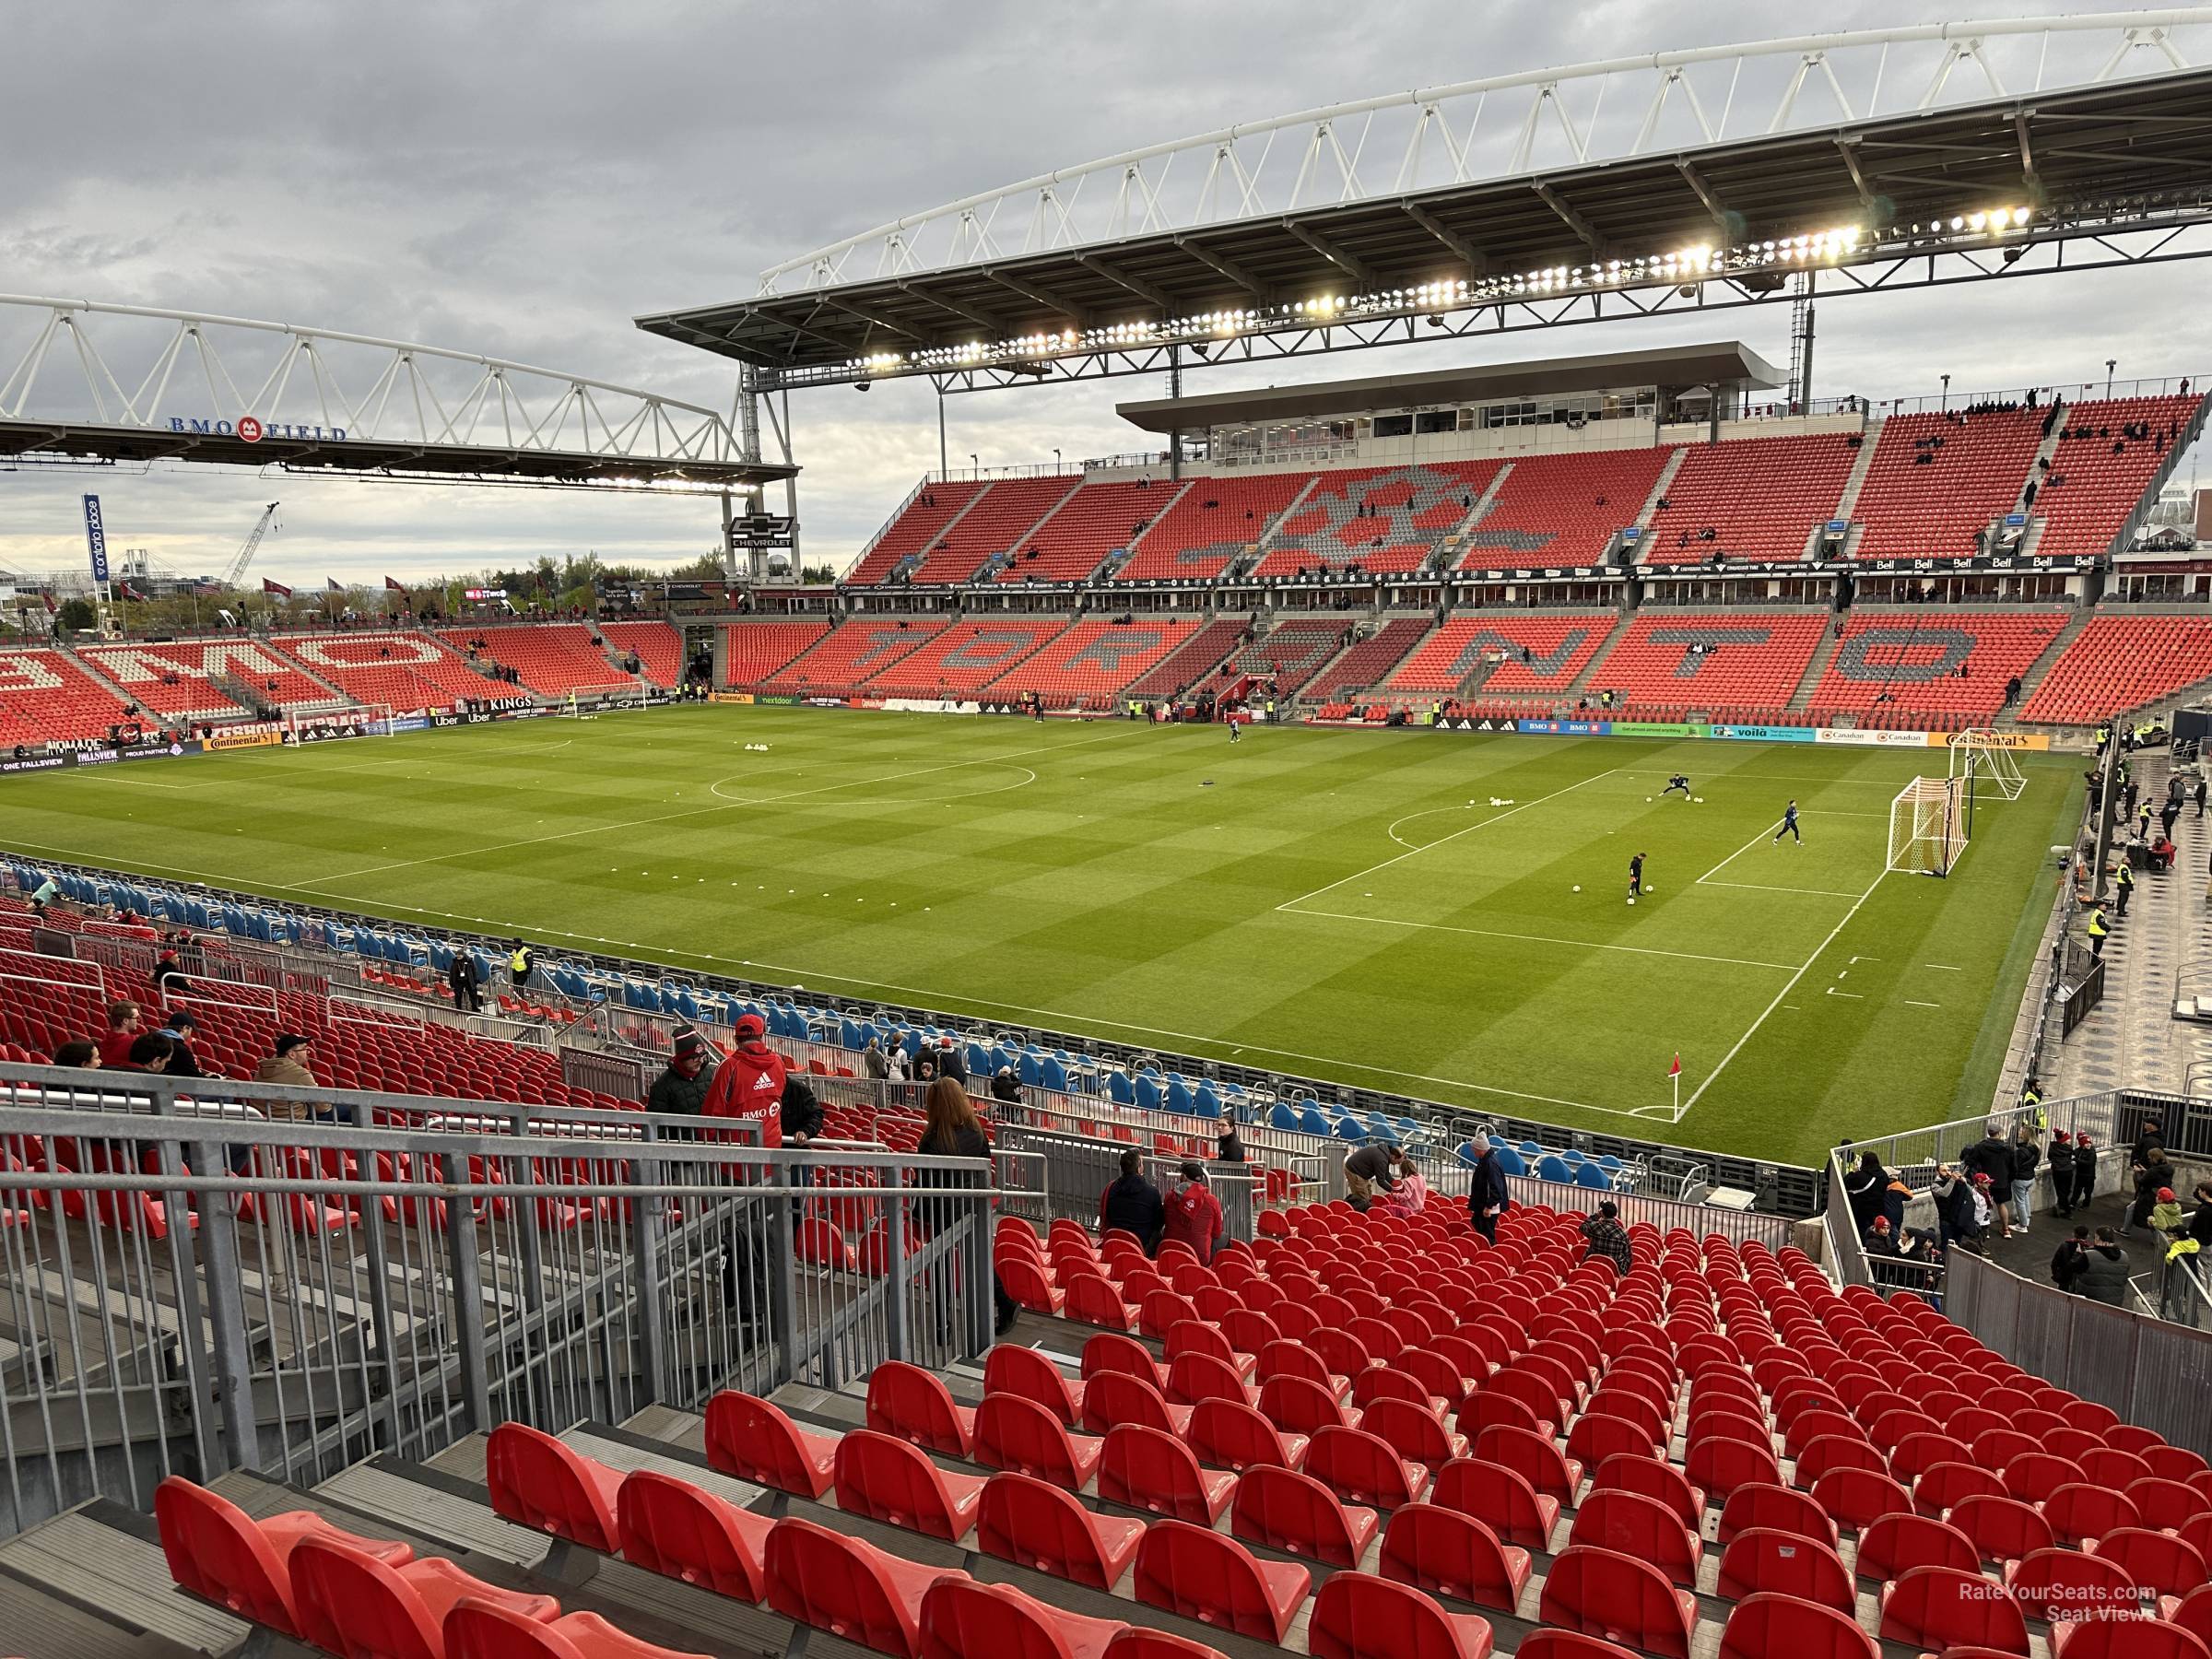 section 104, row 30 seat view  - bmo field